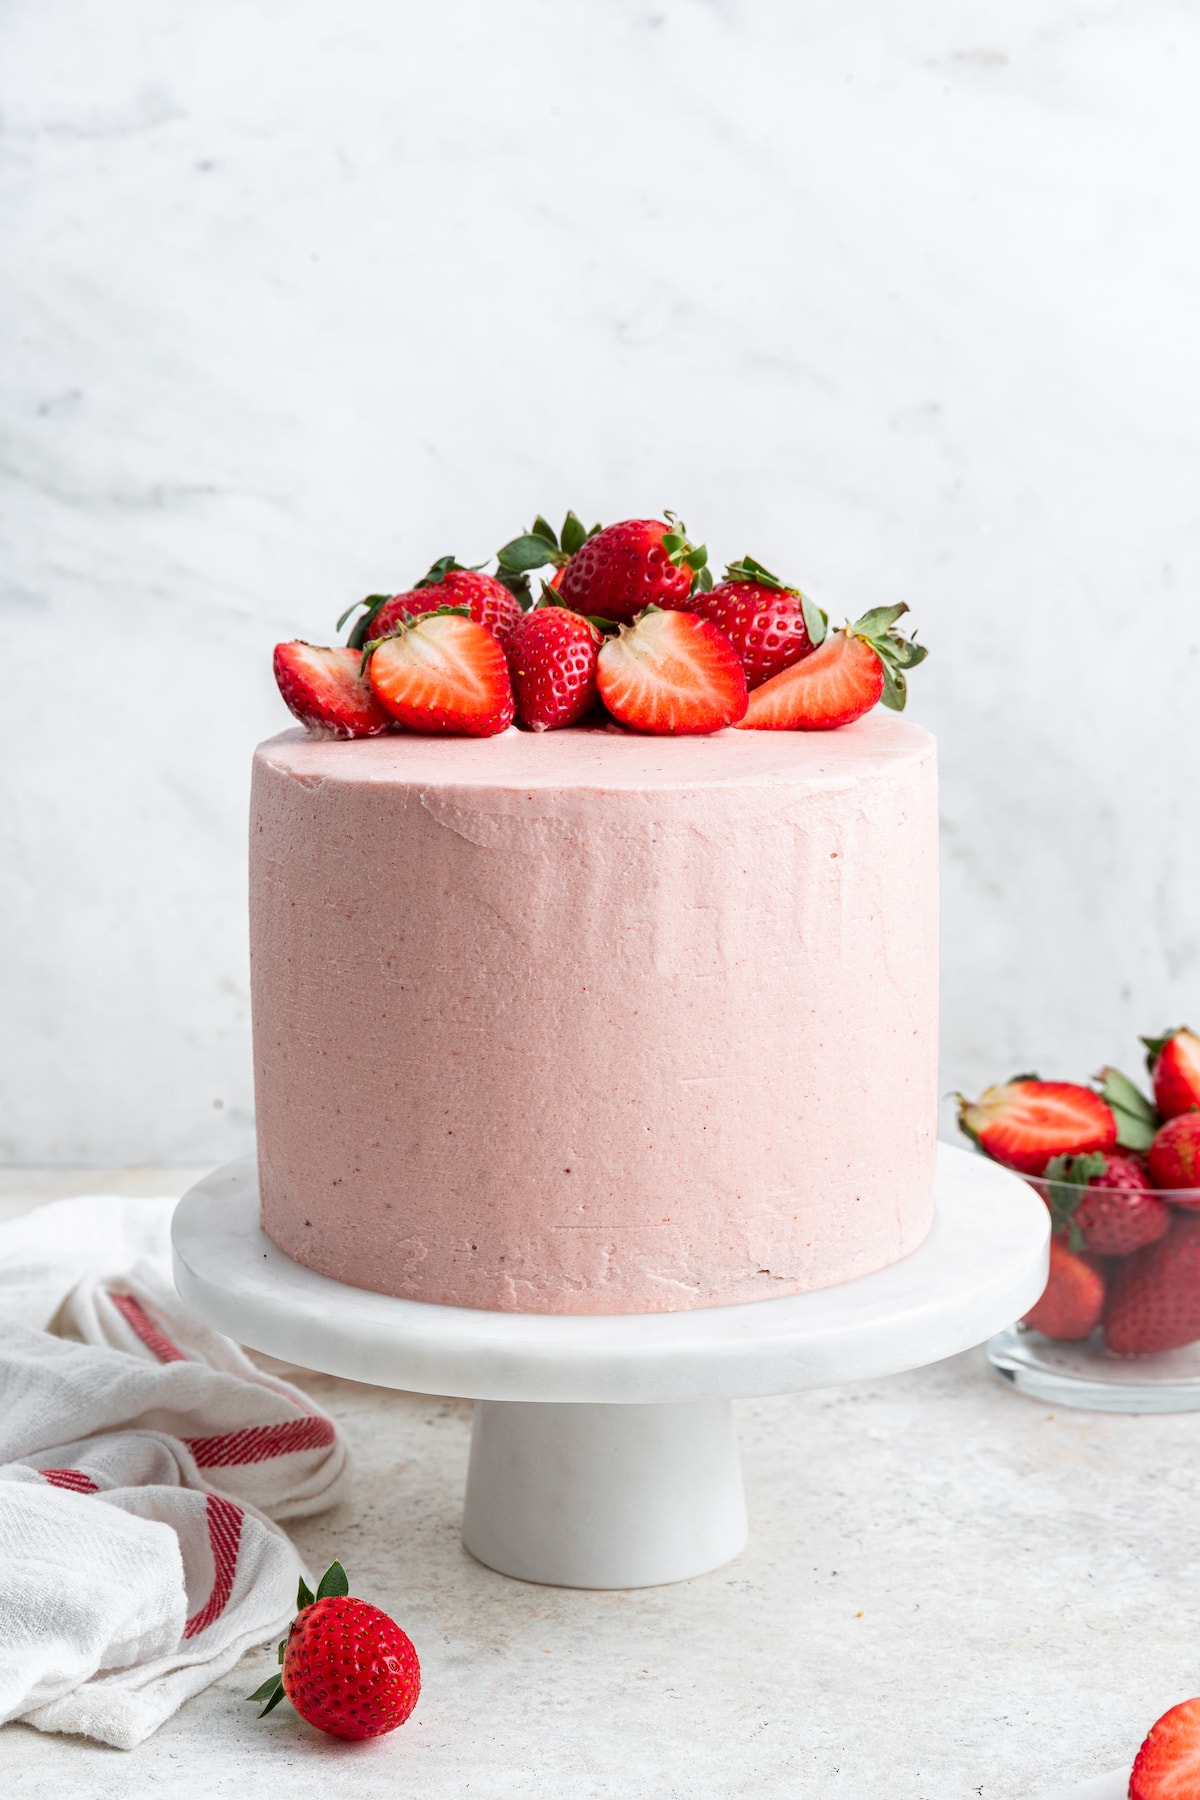 A strawberry cake with pink frosting and fresh strawberries on top on a small white pedestal.